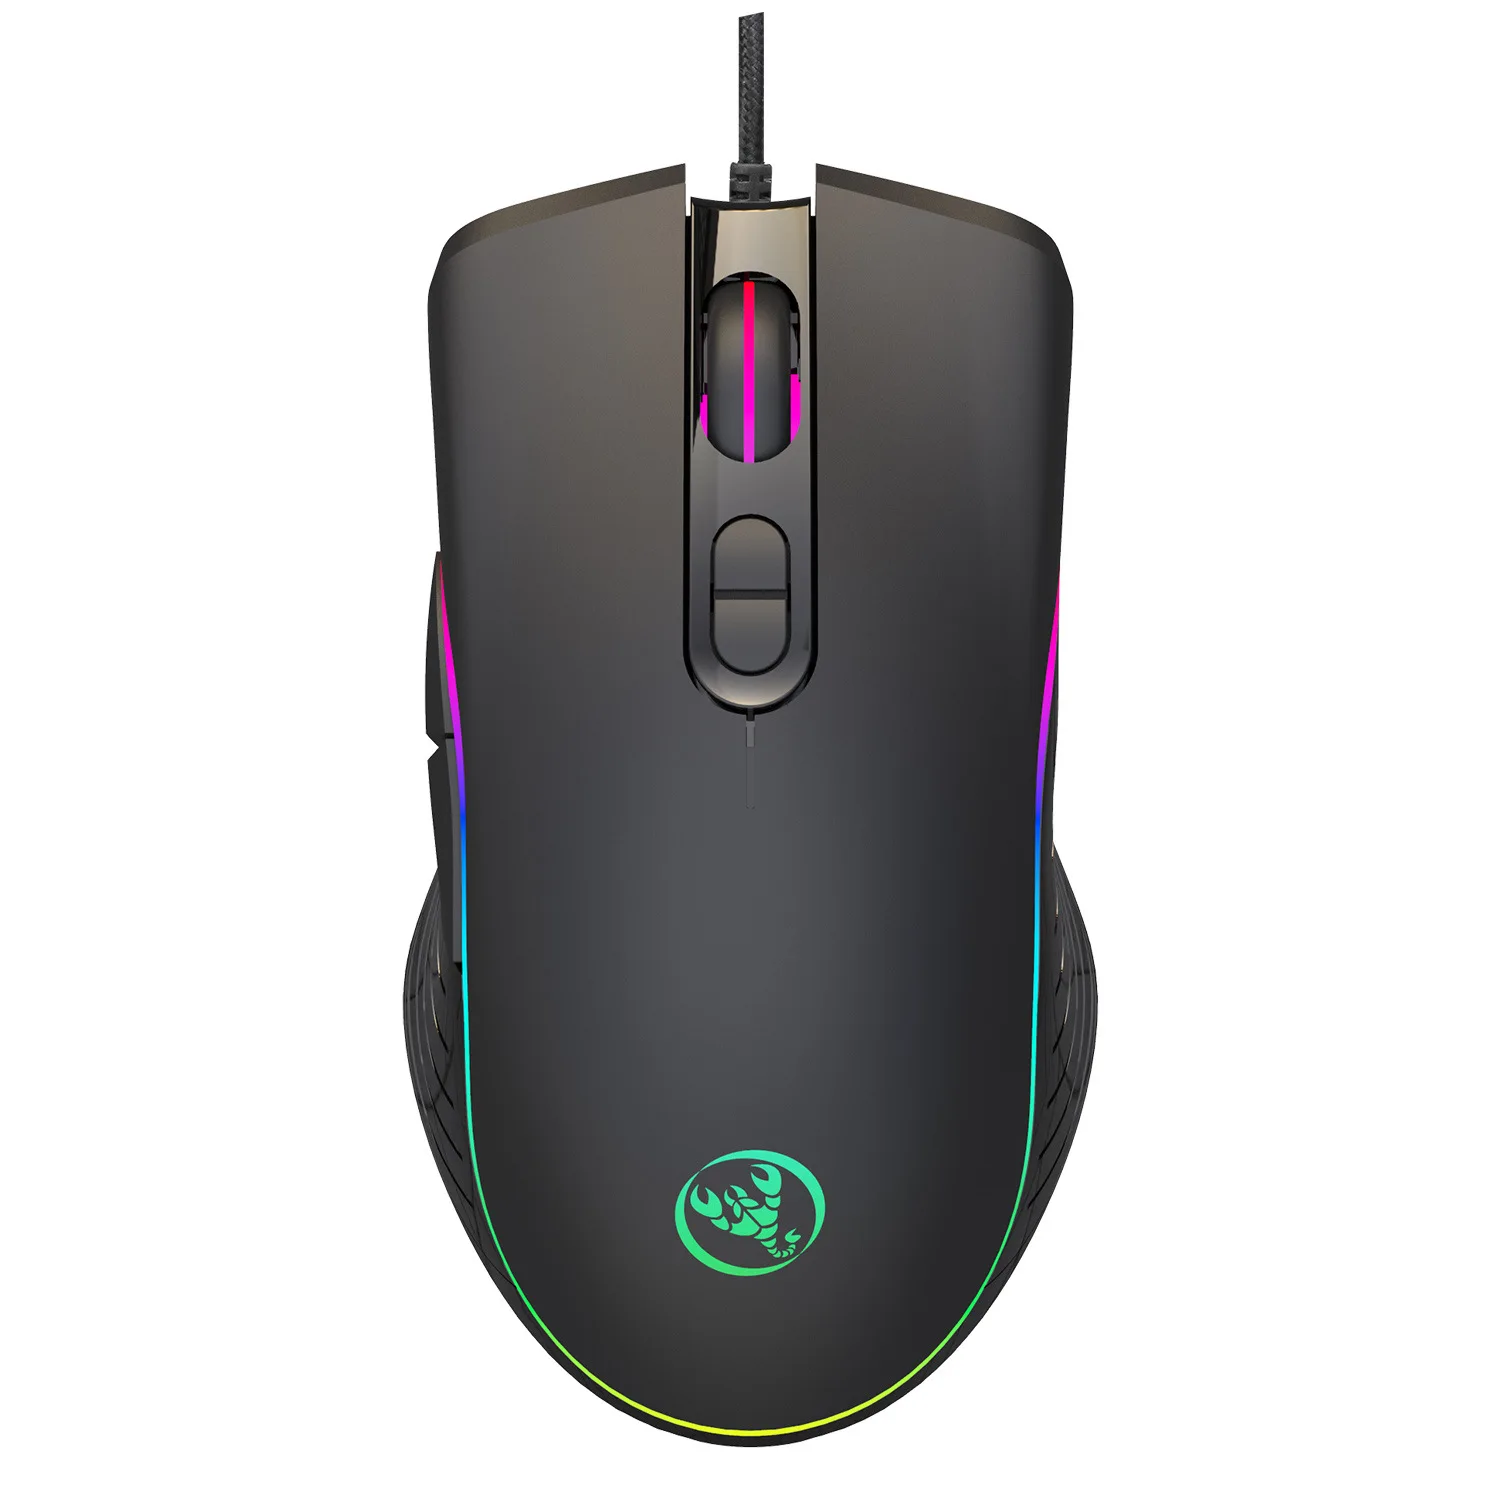 

7 RGB BACKLIT MODES Gaming Wired Mouse 4 Speed Adjustable 6400 Dpi Macro Programming Ergonomics Game Mice for Computer PC Laptop